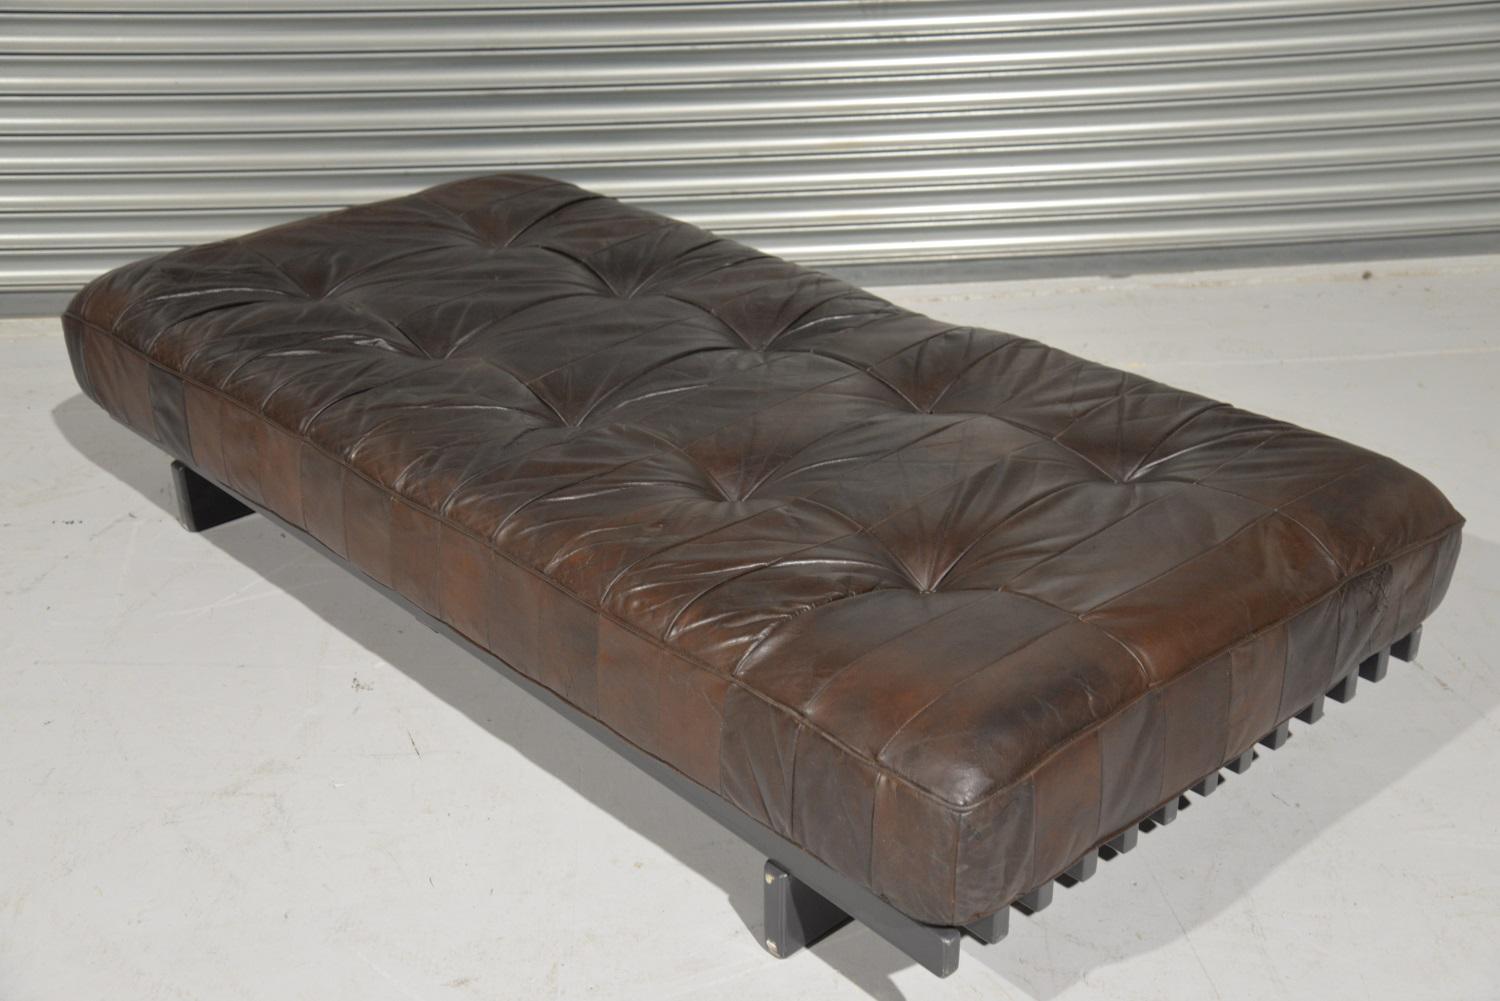 Vintage De Sede DS 80 Patchwork Leather Daybed, Switzerland, 1960s For Sale 2